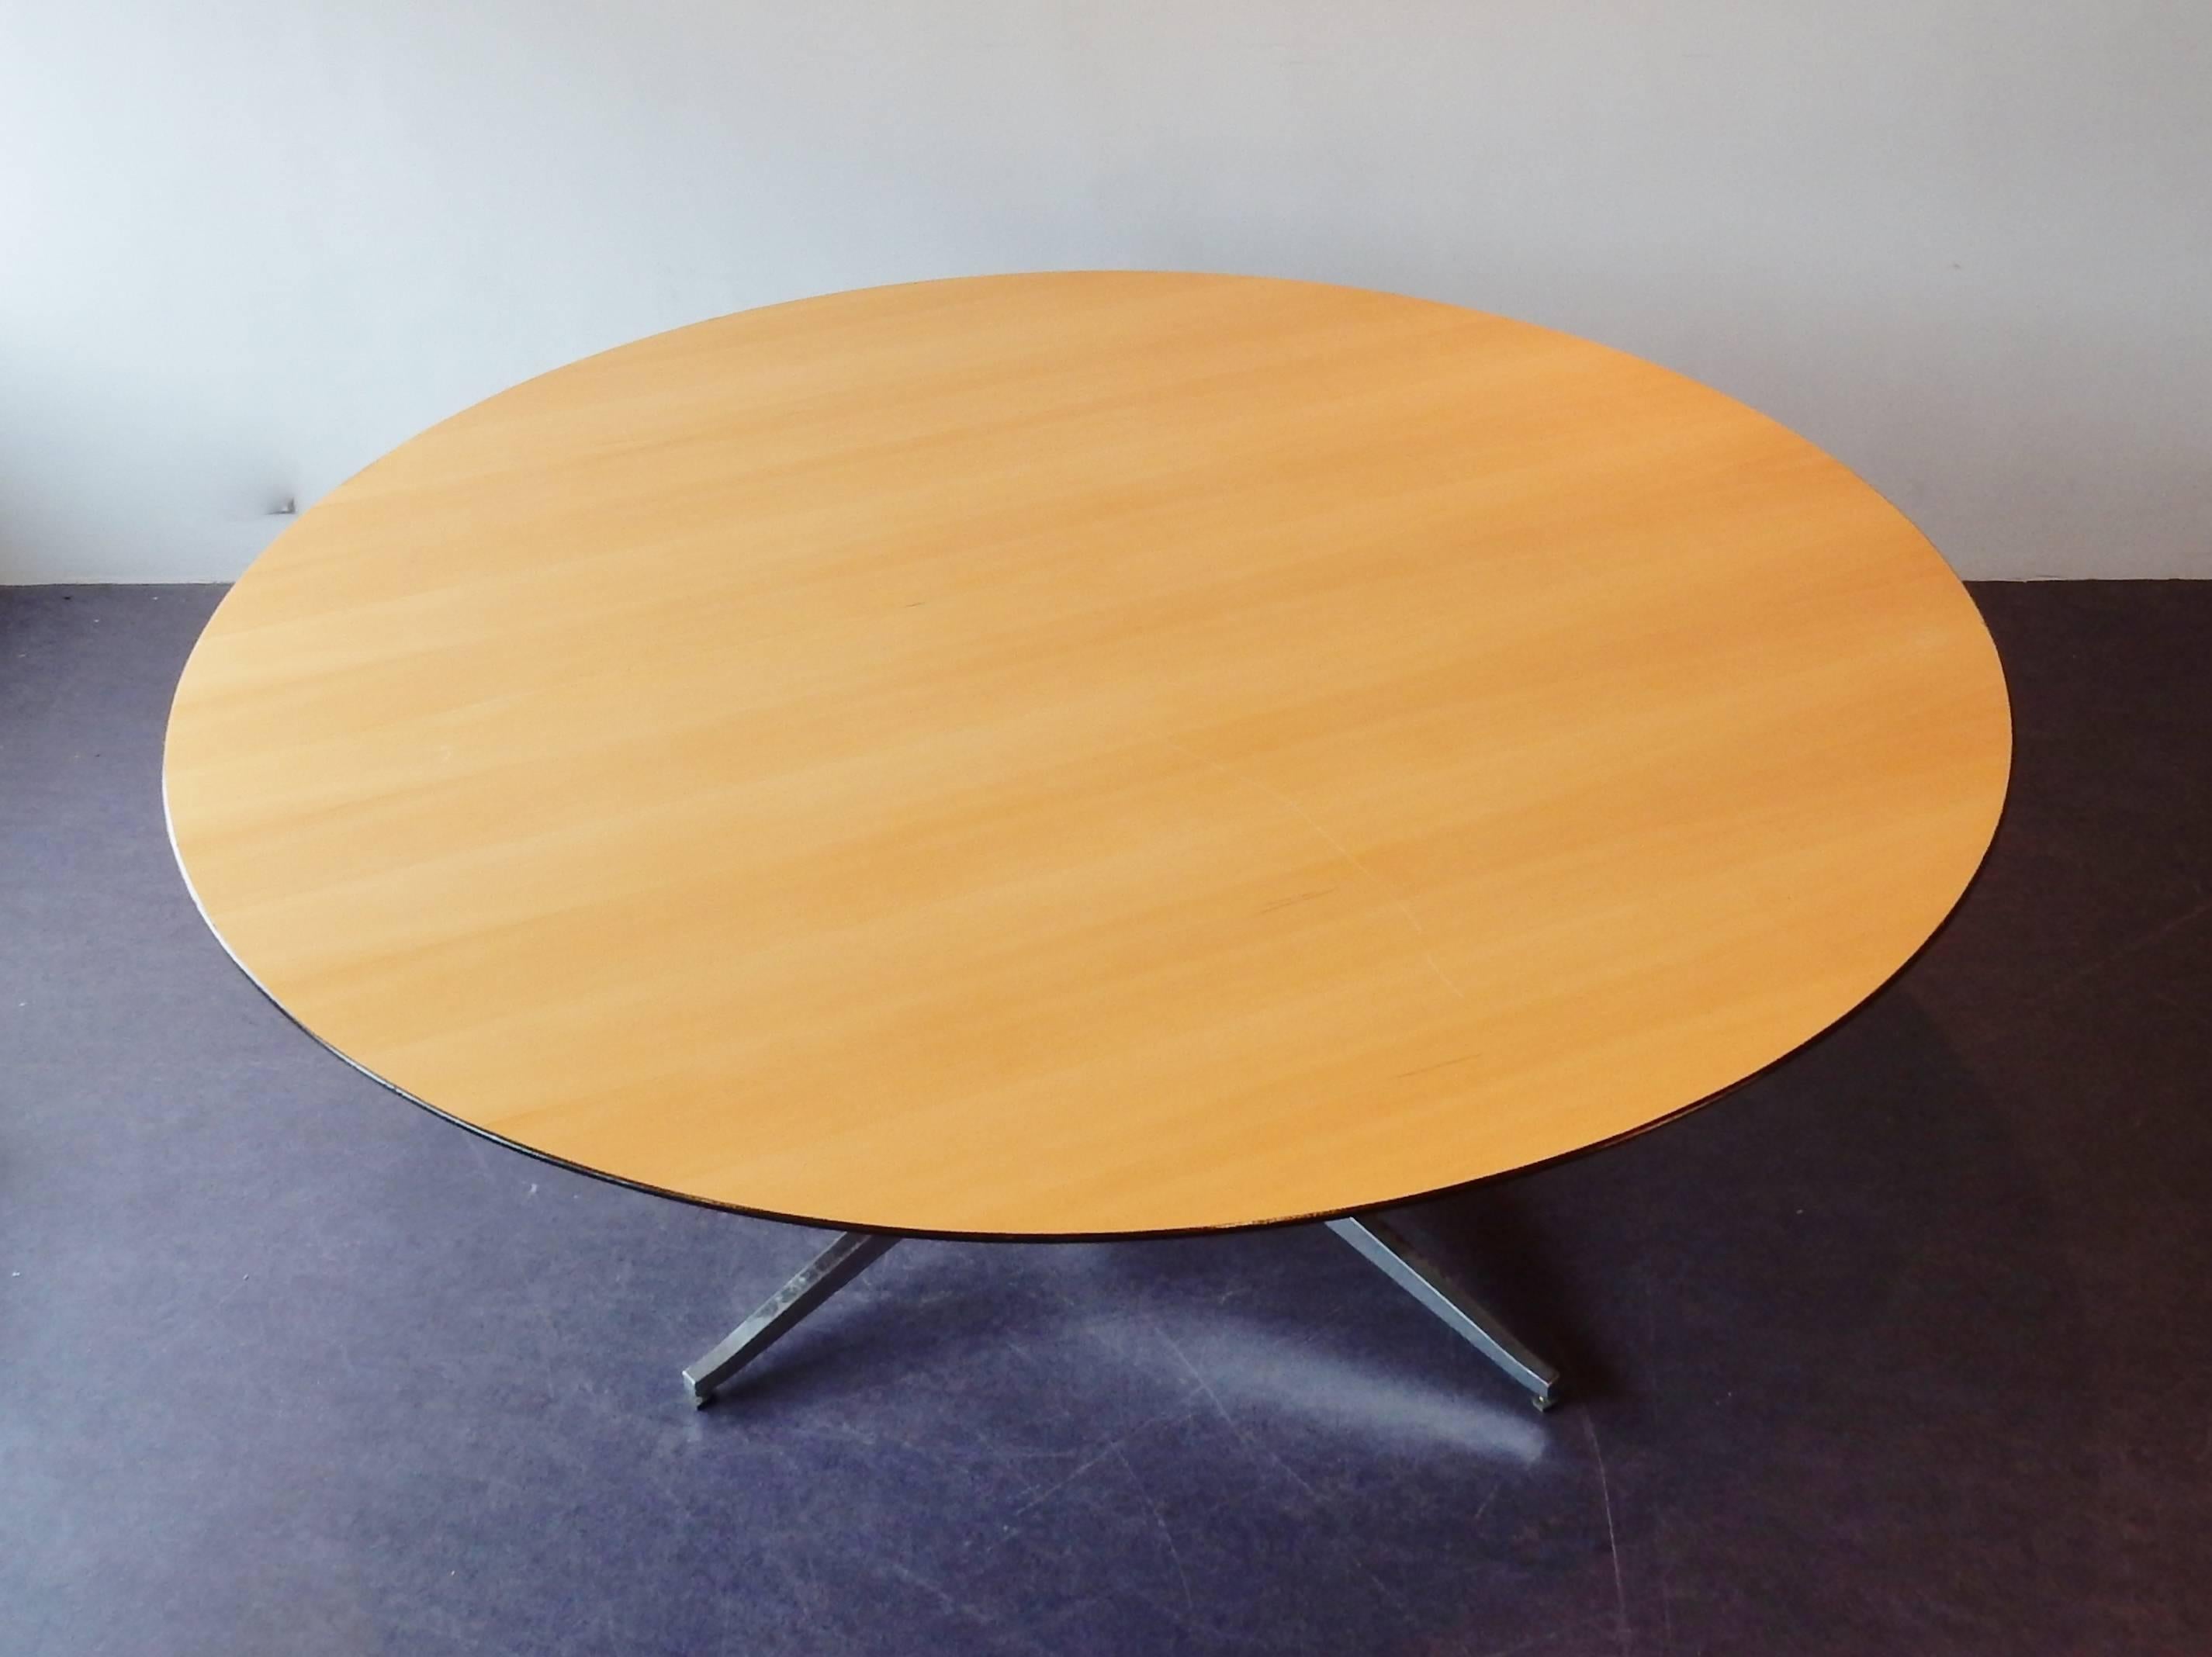 Plus size round dining or conference table by Florence Knoll for Knoll. The table, with a Ø of 200cm, has a beech veneered top with black lacquered bevelled edge. The table is in a very good and solid condition with signs of age and use. The top